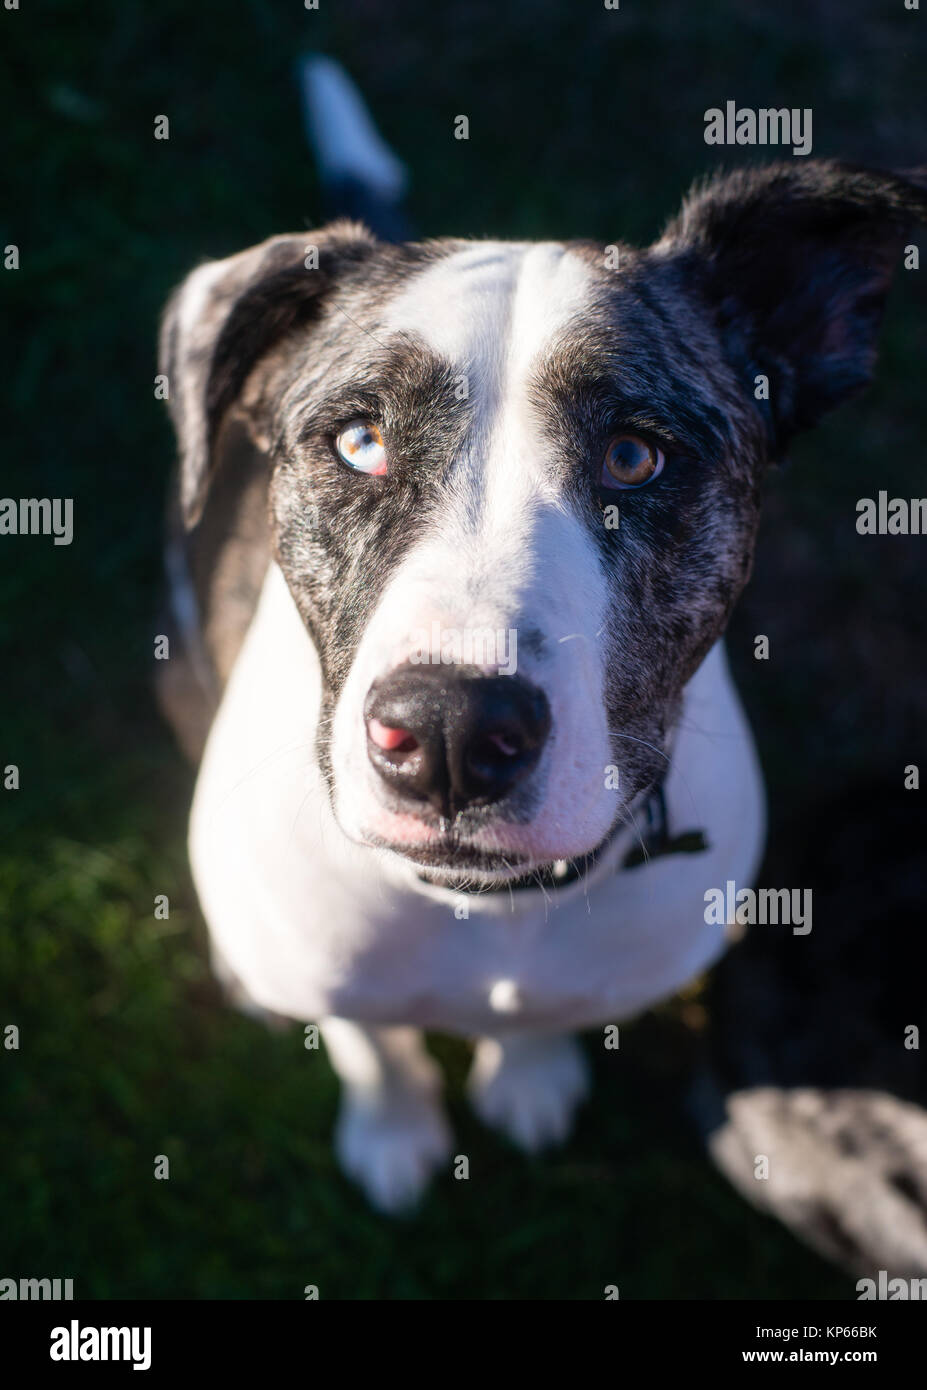 Bright Eyed Unique Looking Dog Canine Looks at Camera Stock Photo